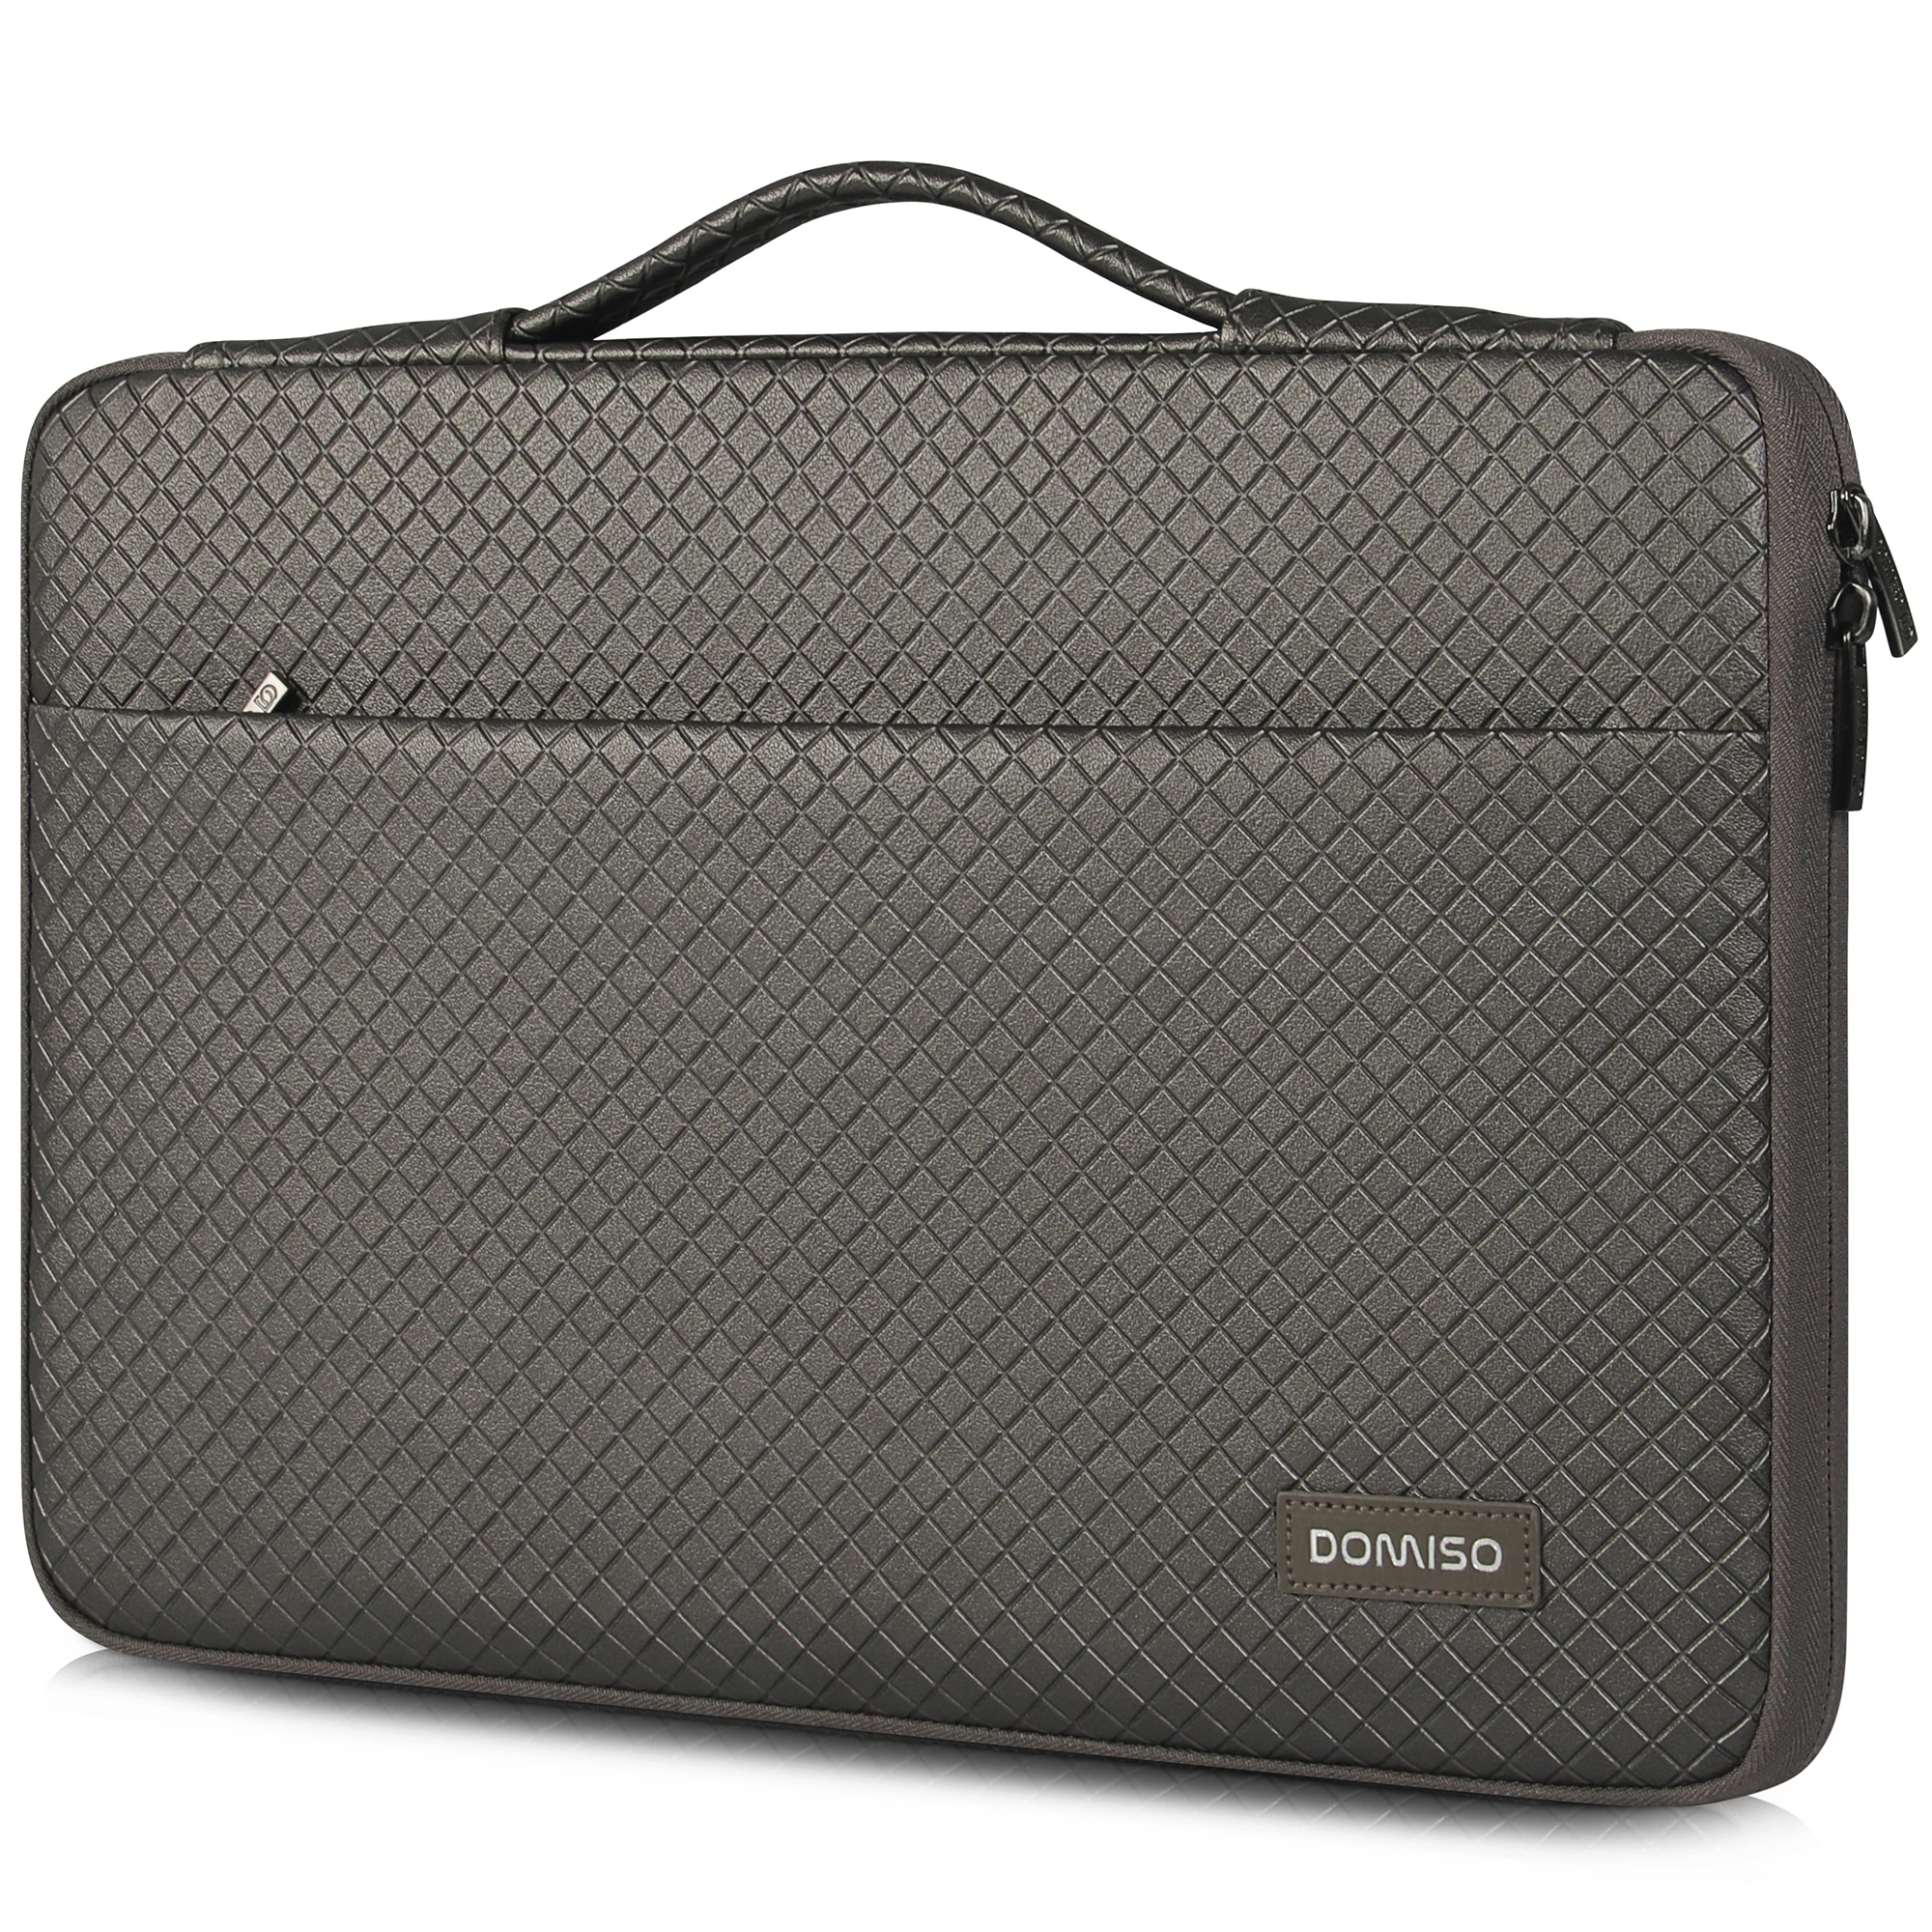 

DOMISO Bright Grey Or Black Waterproof Shookproof Laptop Sleeve Bag With Handle For 10" 11" 13" 13.3" 14" 15.6" inch Notebook